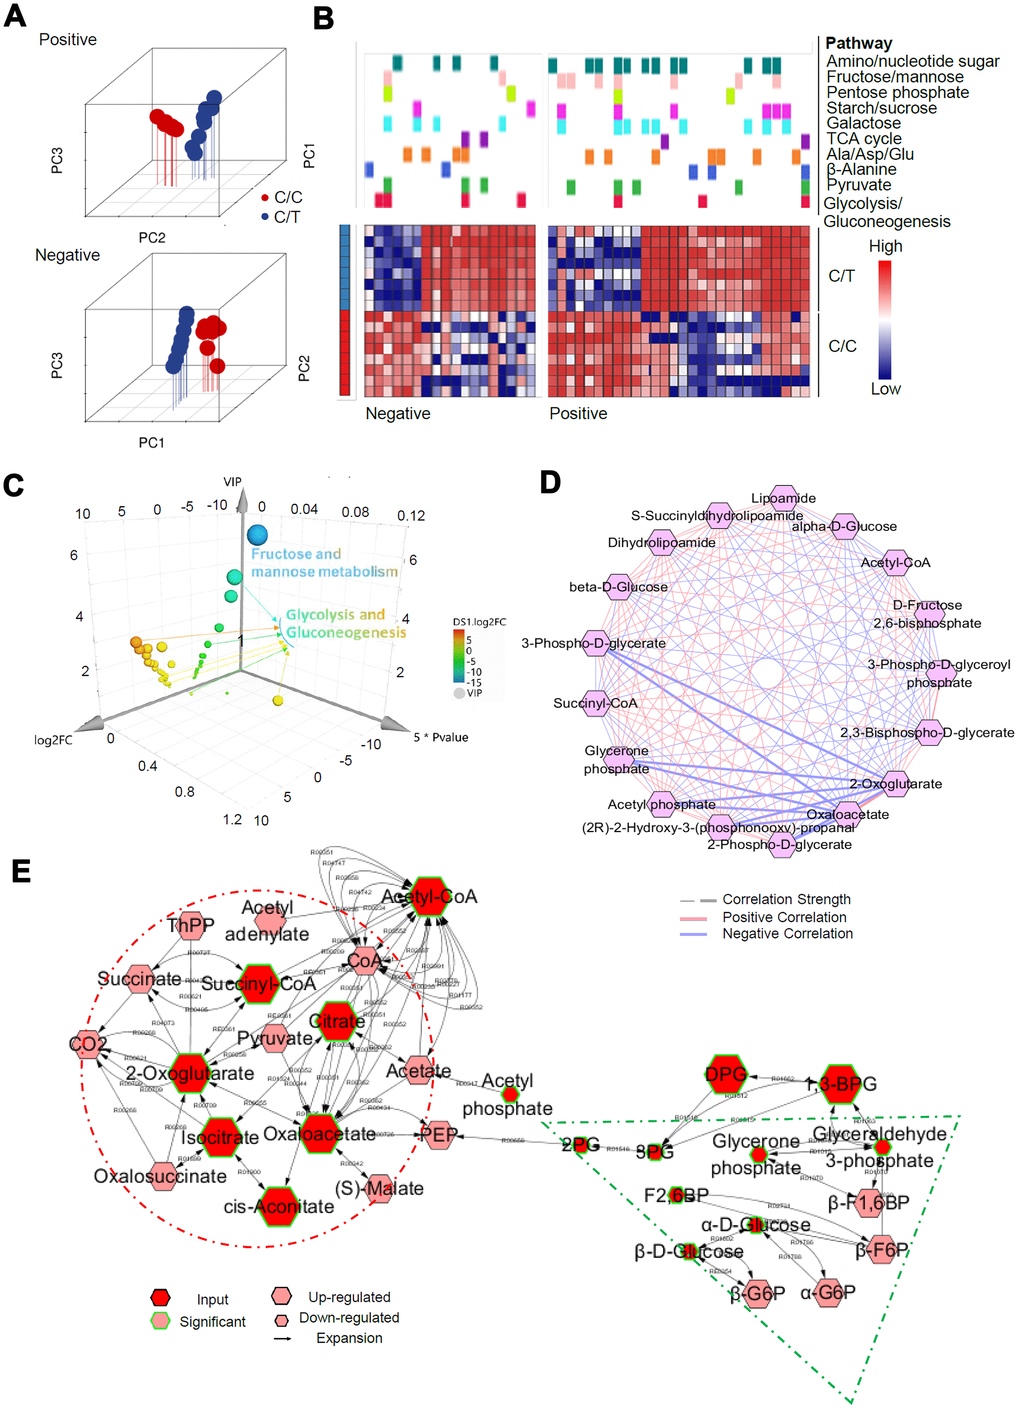 Metabolomic alterations in PLC-PRF-5 cells with the rs290487 C/C genotype. (A) 3D Principal component analysis (PCA) plots of metabolomics data from C/C and C/T cells. (B) Mummichog 2.0 analysis results of altered pathways (glucose metabolic pathways) in C/C cells compared to C/T cells. (C) 3D bubble plot shows altered metabolic features, especially changes in the glycolysis/gluconeogenesis pathway in C/C cells compared to C/T cells using SIMCA 14, the online multivariate tool. The X, Y, and Z-axis represent log2fold change, P value, and VIP, respectively. (D) Correlation-based network of metabolites related to glycolysis and gluconeogenesis visualized using Metscape 3. (E) The expression of metabolites related to glycolysis and gluconeogenesis visualized using Metscape 3. The red circle shows the increased metabolites related to gluconeogenesis such as Oxaloacetate, whereas the green triangle represents decreased glycolytic metabolites such as, D-Glyceraldehyde 3-phosphate.